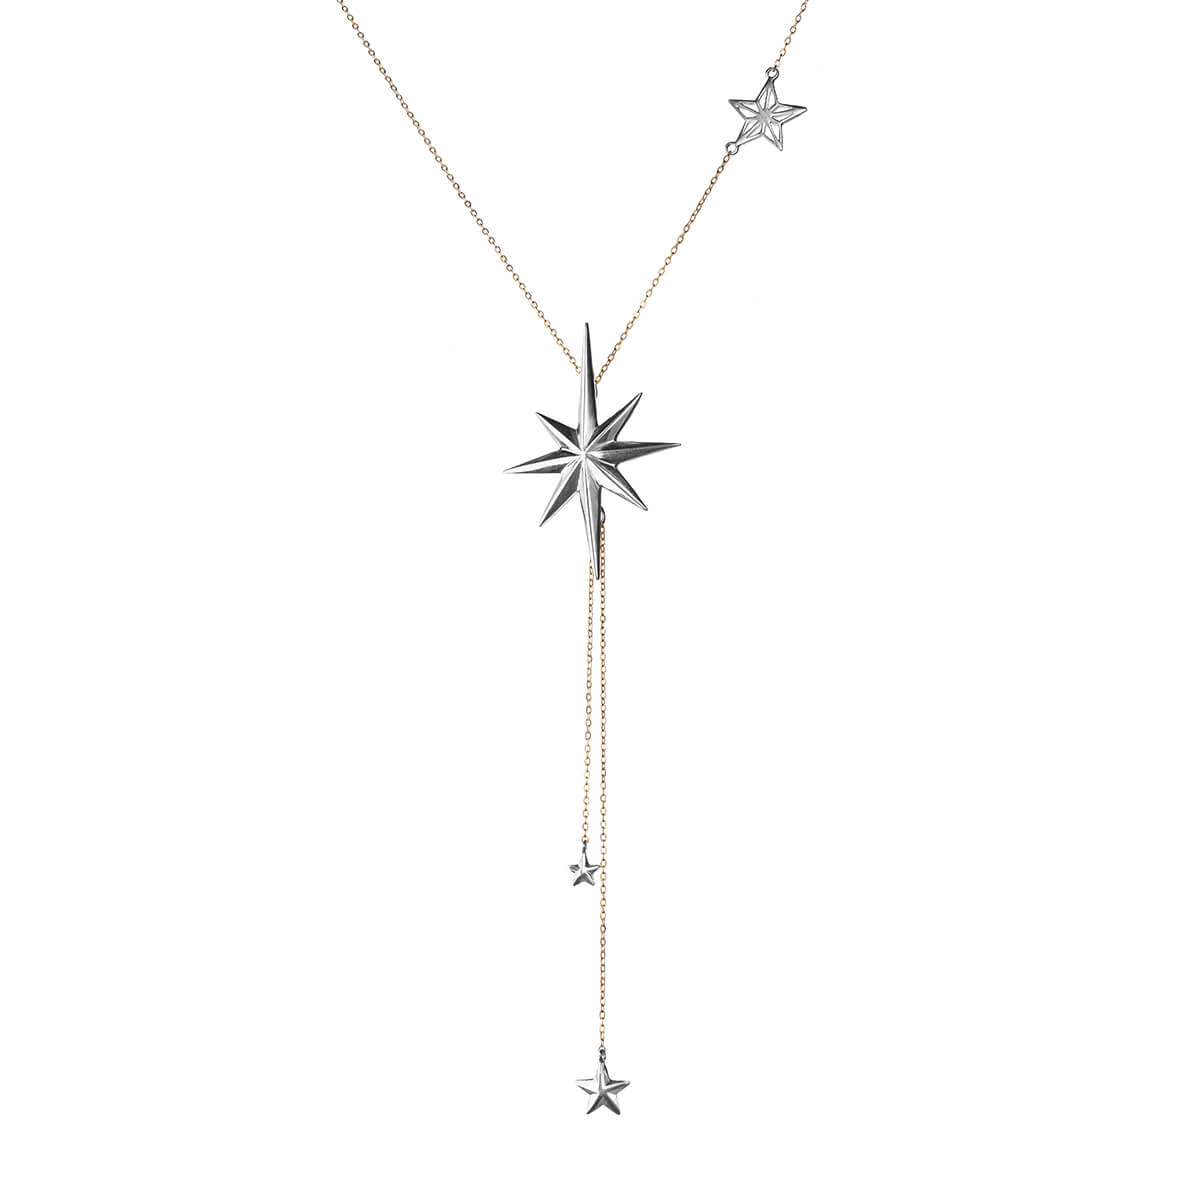 North Star Lariat Necklace